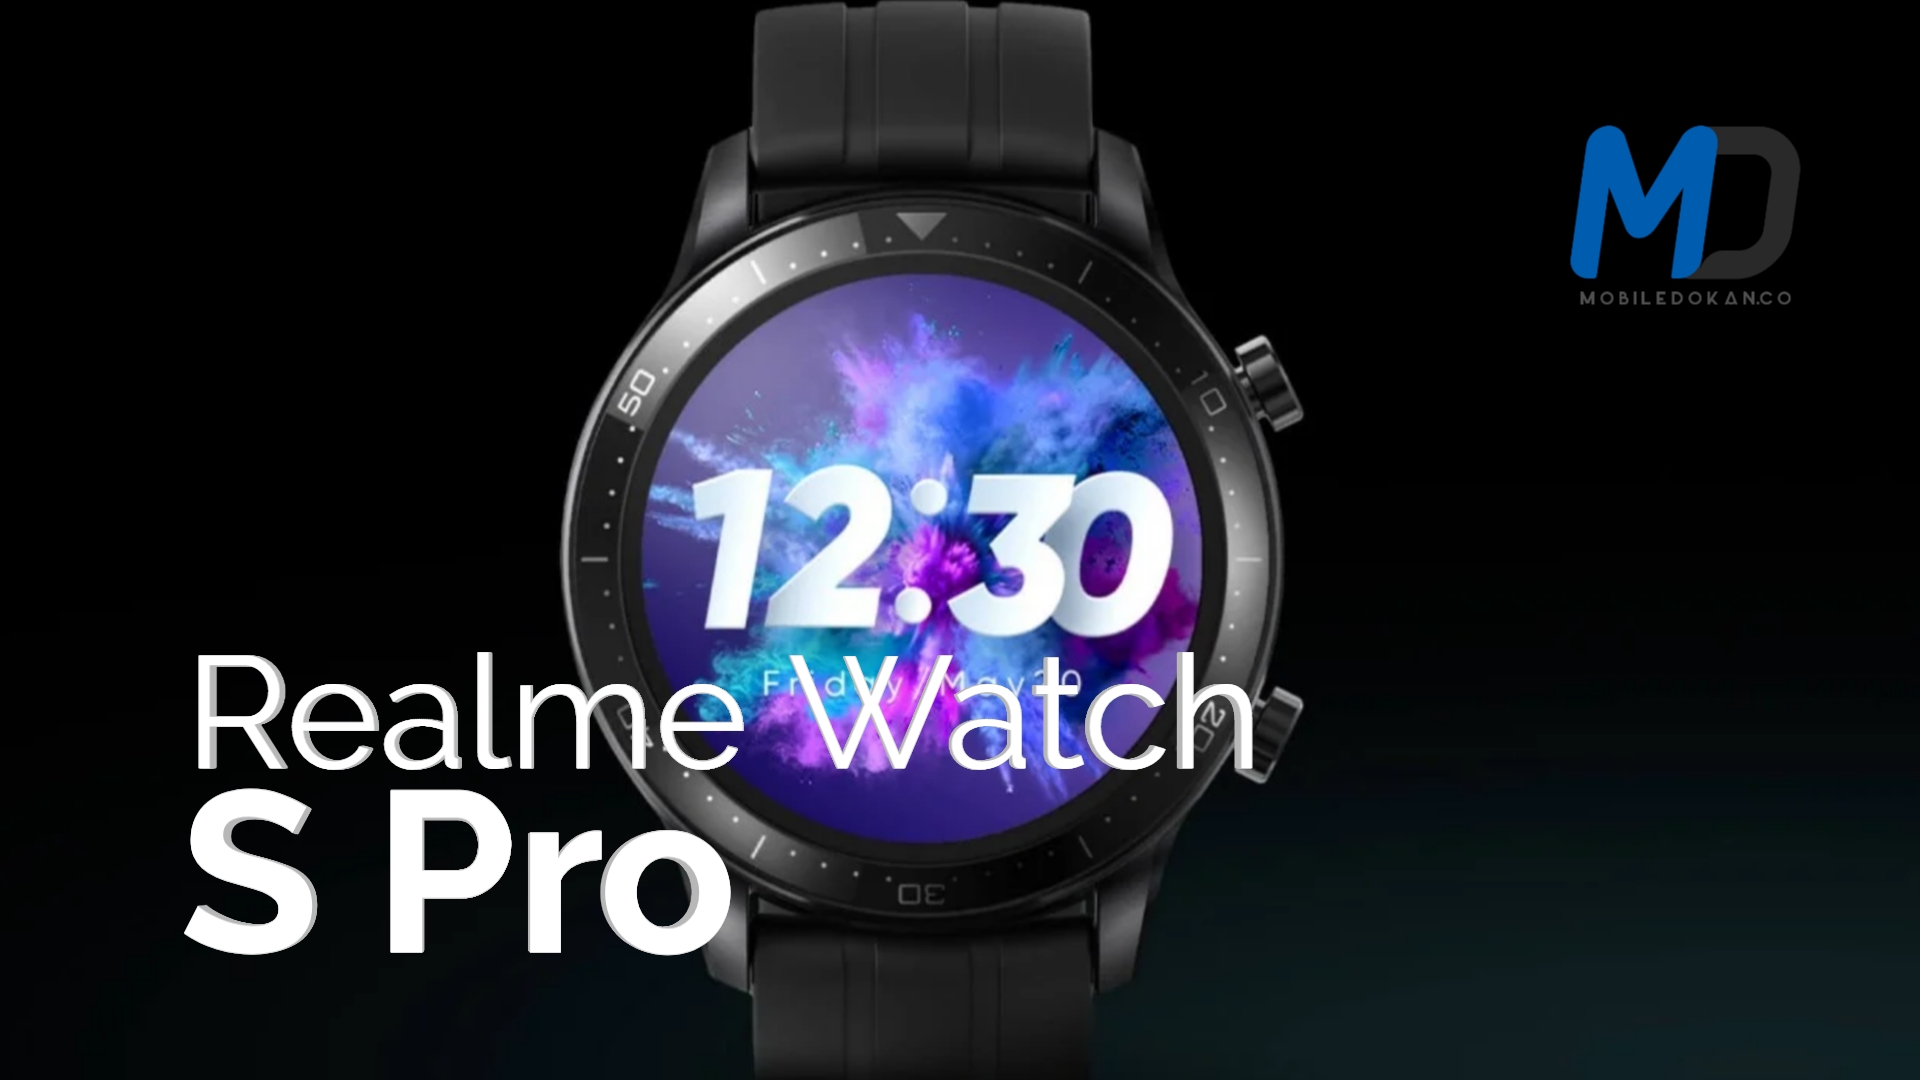 Realme Watch S Pro launch for China soon, here are some of its specifications